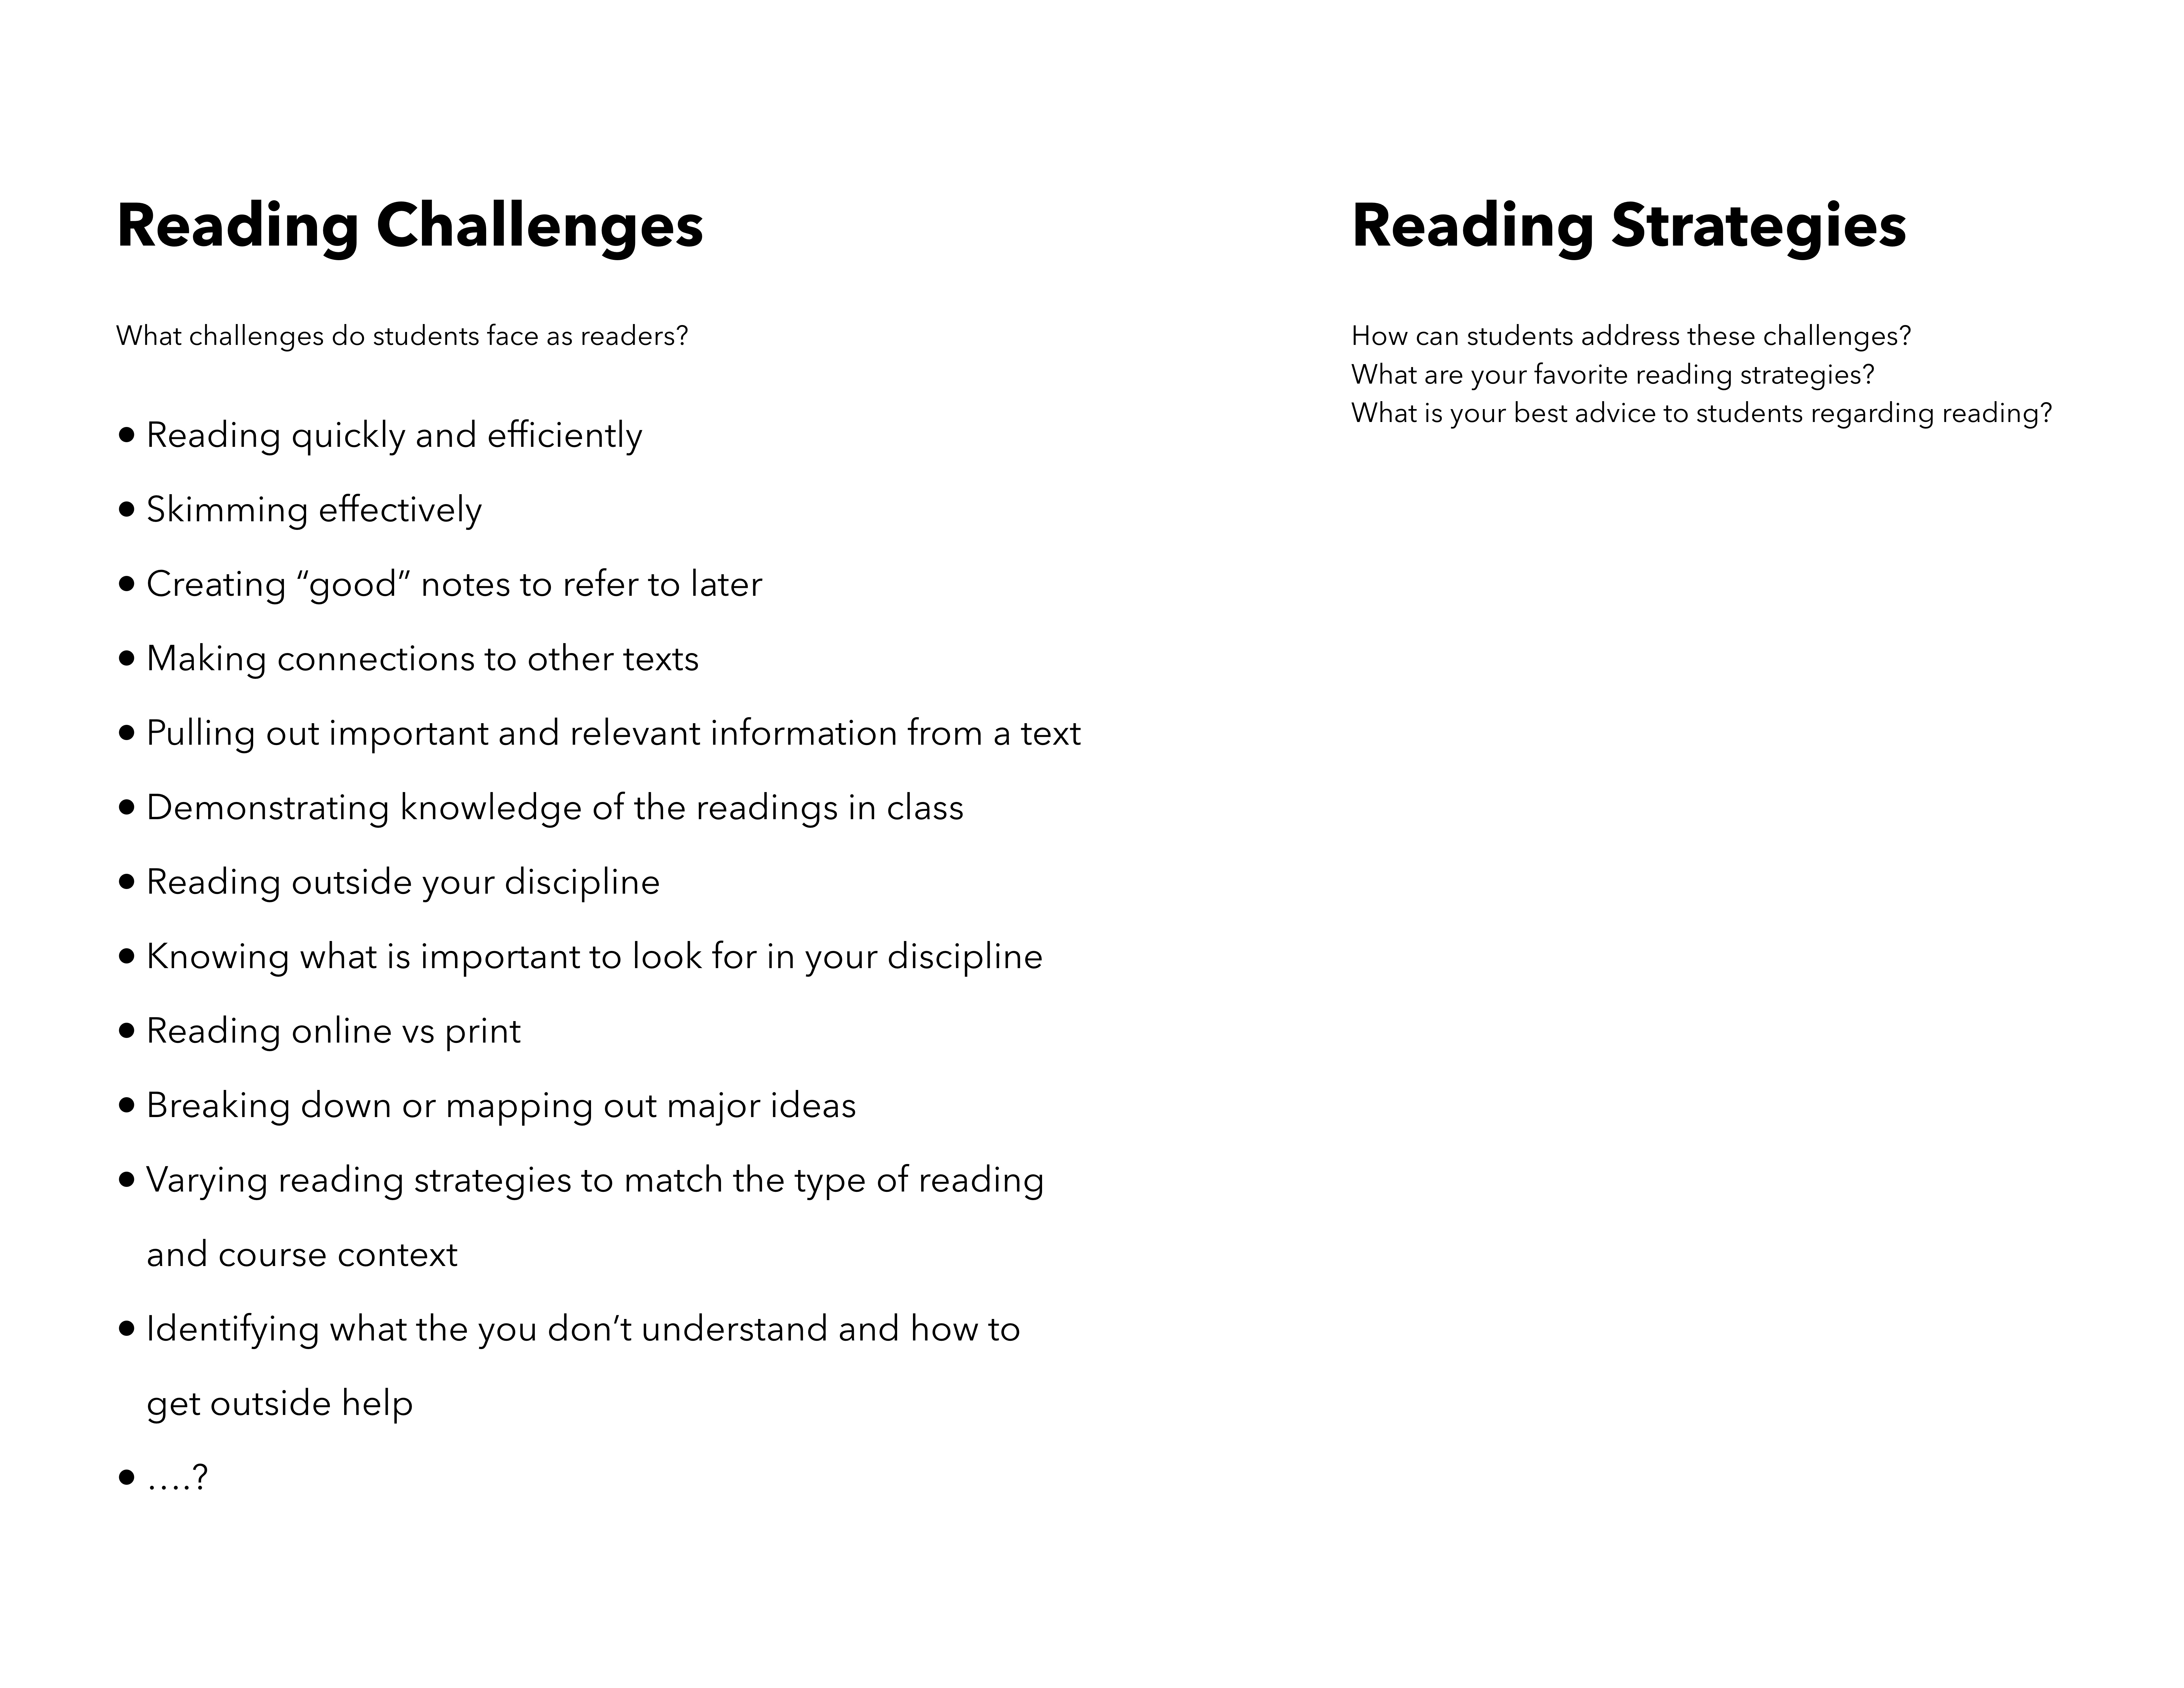 Reading strategies brainstorming handout with areas for communication challenges and strategies for email and in-person communication.